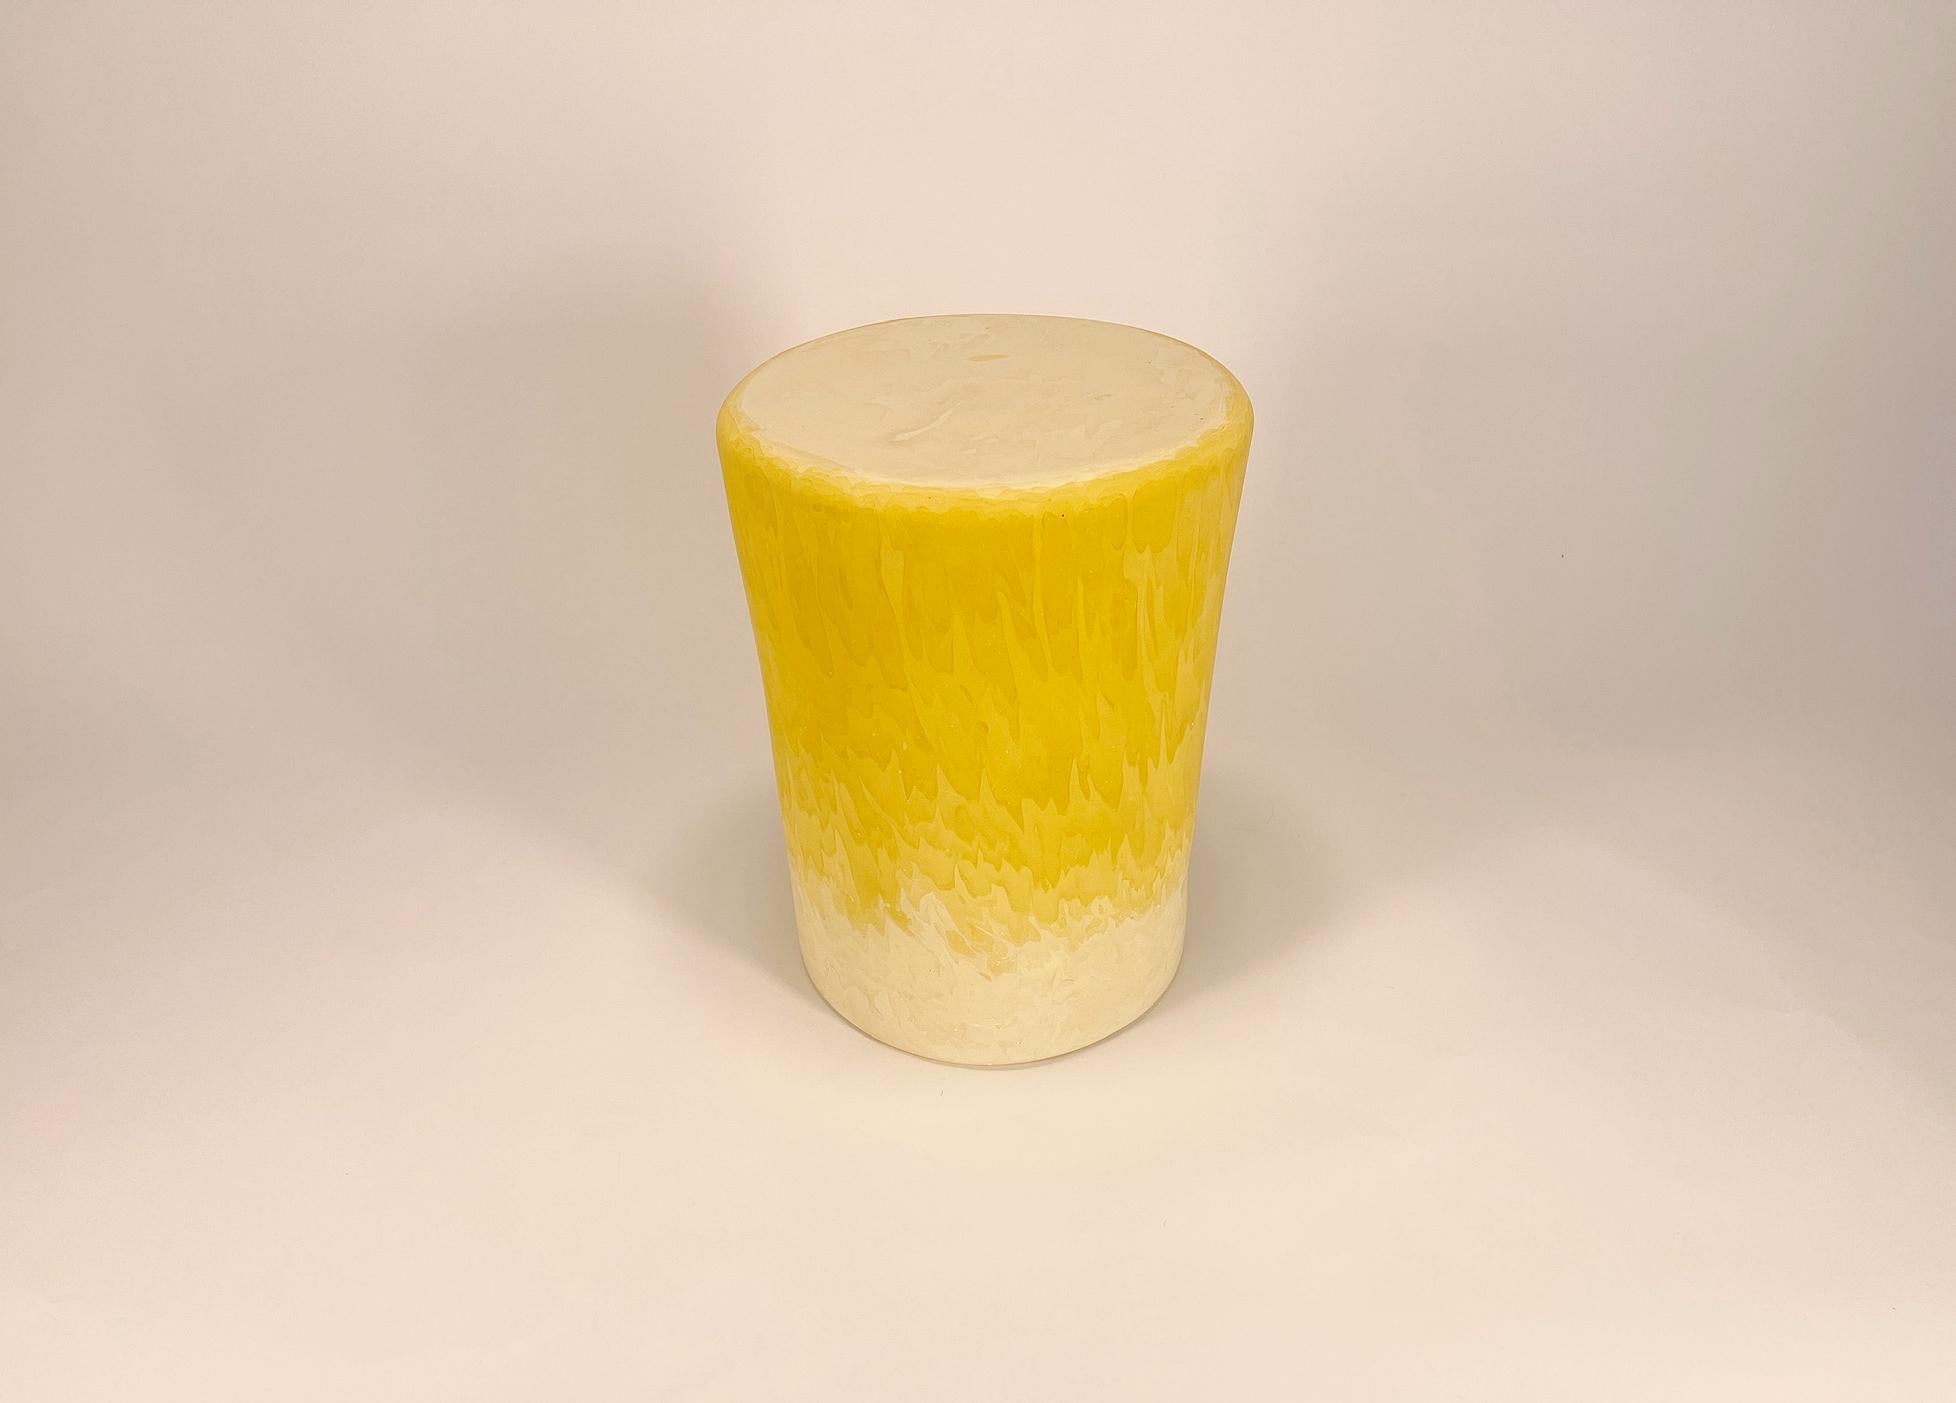 In this piece, the artist embraces the inherent fluidity of pigmented plaster to sculpt a tapered cylinder, where the material itself narrates a transition from solidity to ethereality. 

As the colors blend from a natural ivory base to a sun-kissed